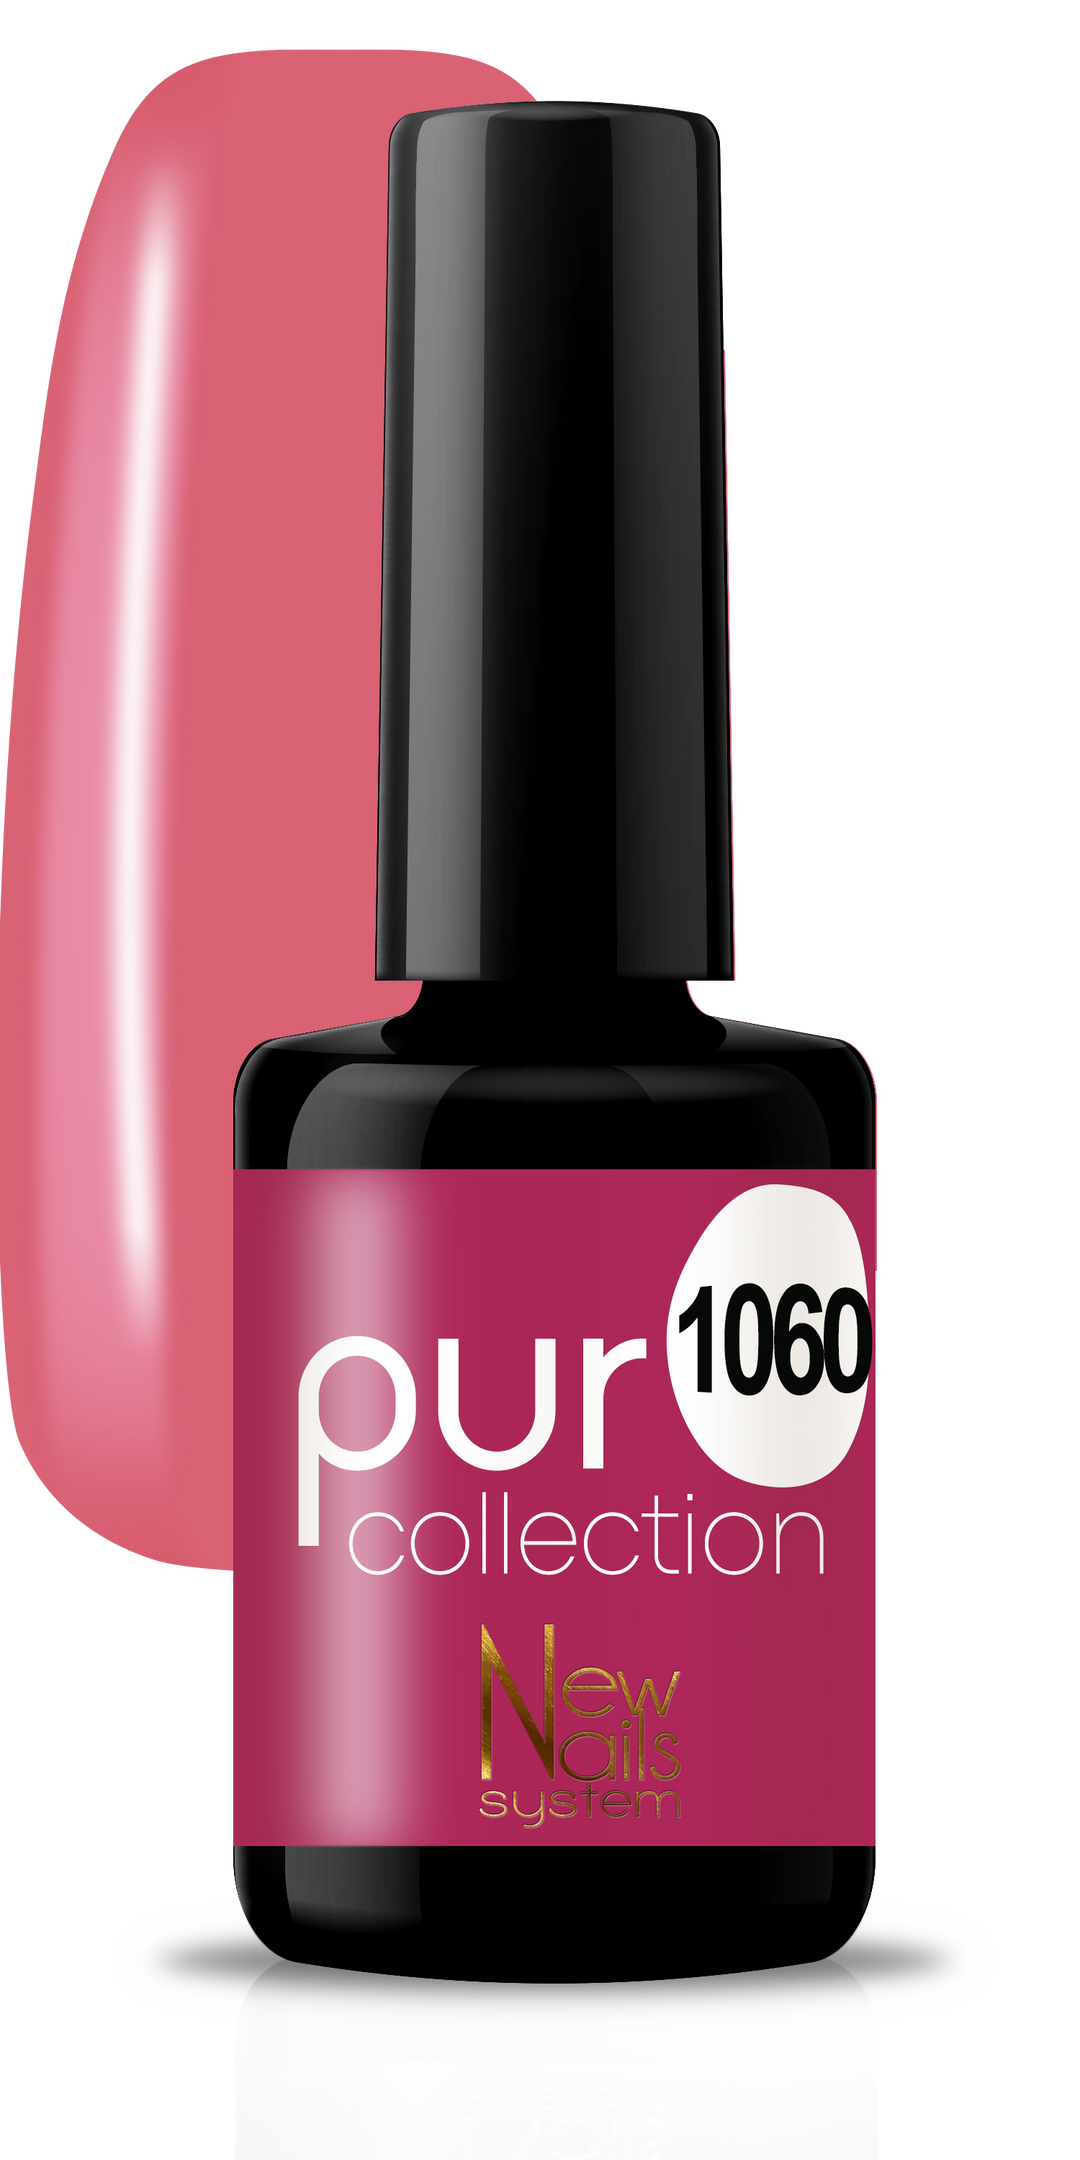 Puro collection Scent of Roses 1060 gel polish color 5ml